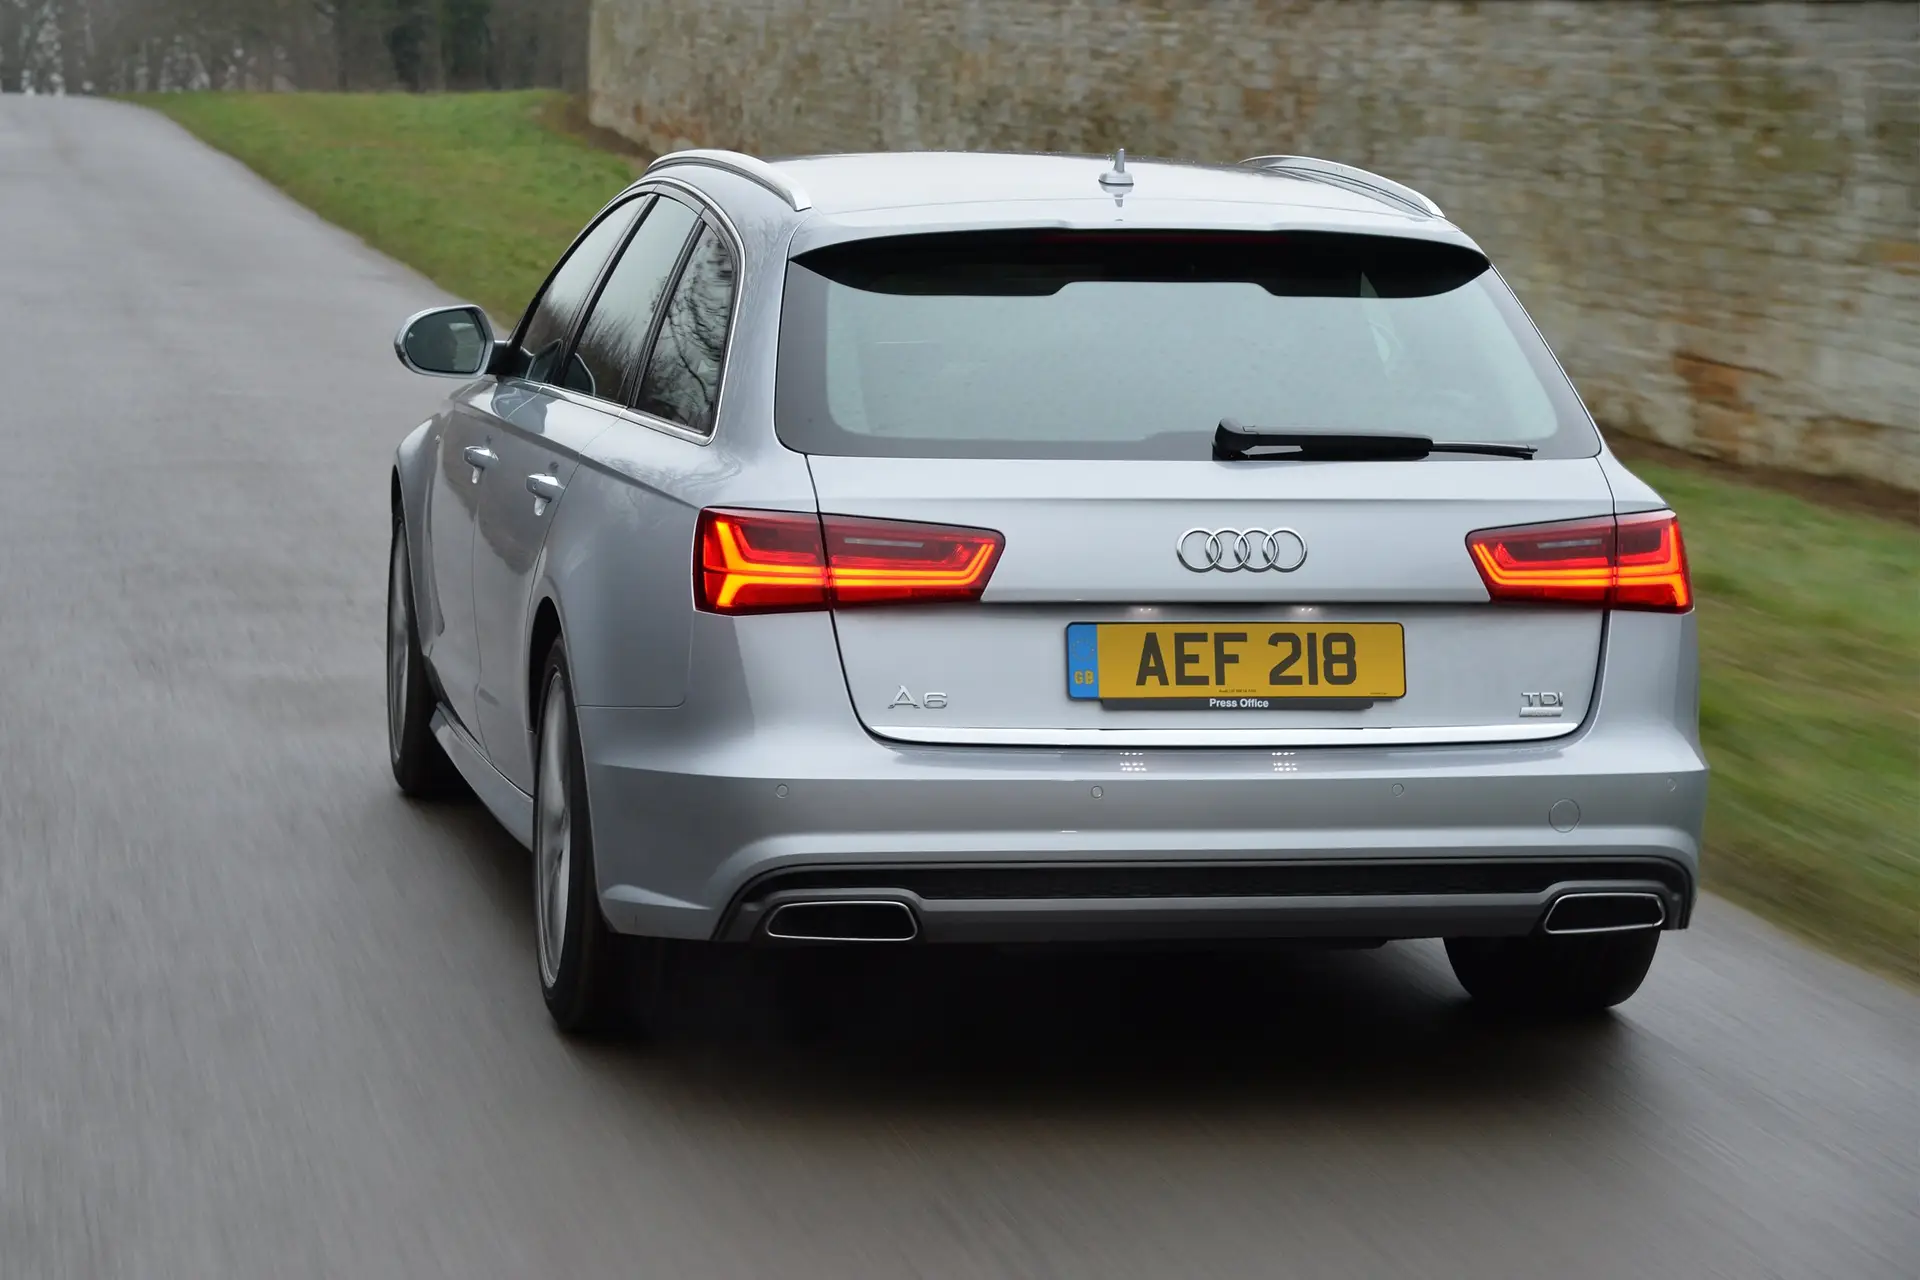 Audi A6 Avant (2011-2018) Review: exterior rear three quarter photo of the Audi A6 Avant on the road